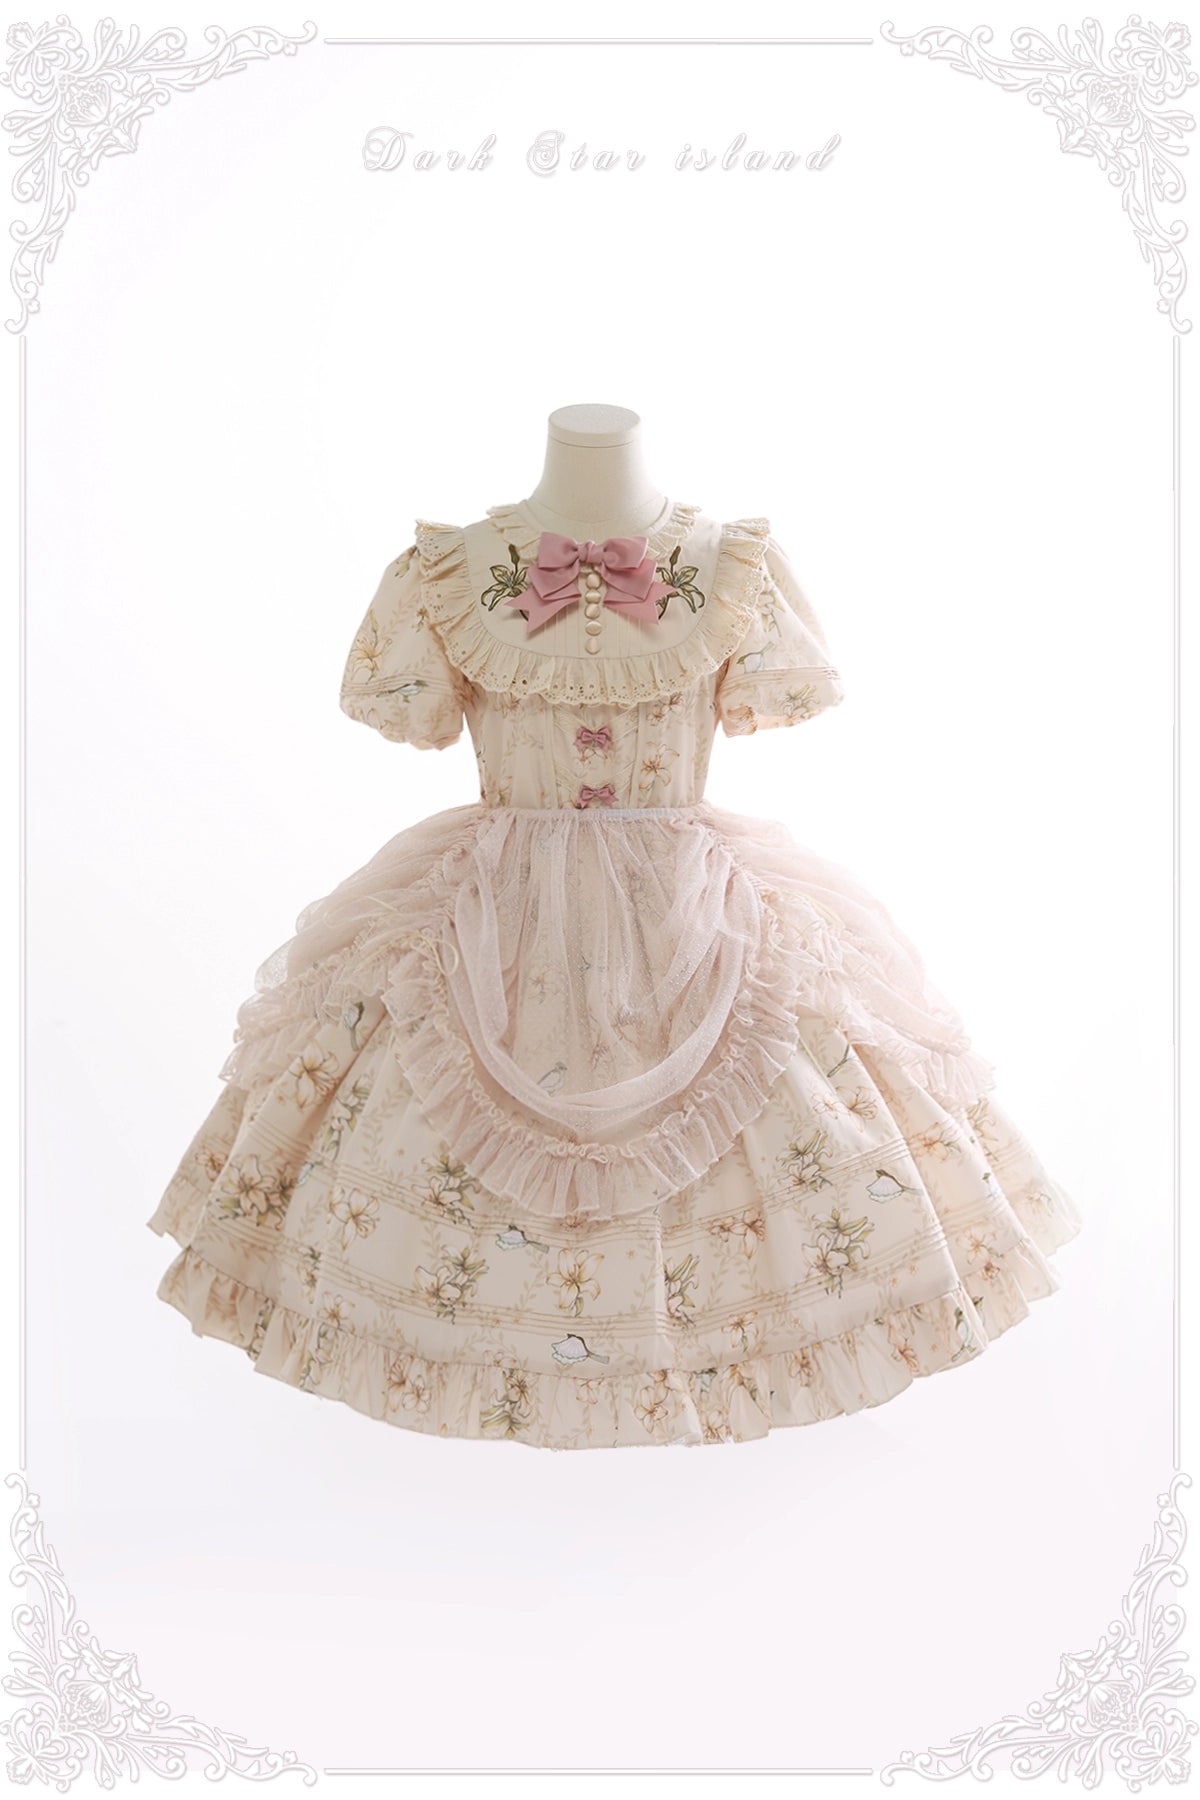 Dark Star Island~Lily&Mountain Breeze~Lily Lolita Accessories BNT One size fits all Short - curtain gauzy skirt 